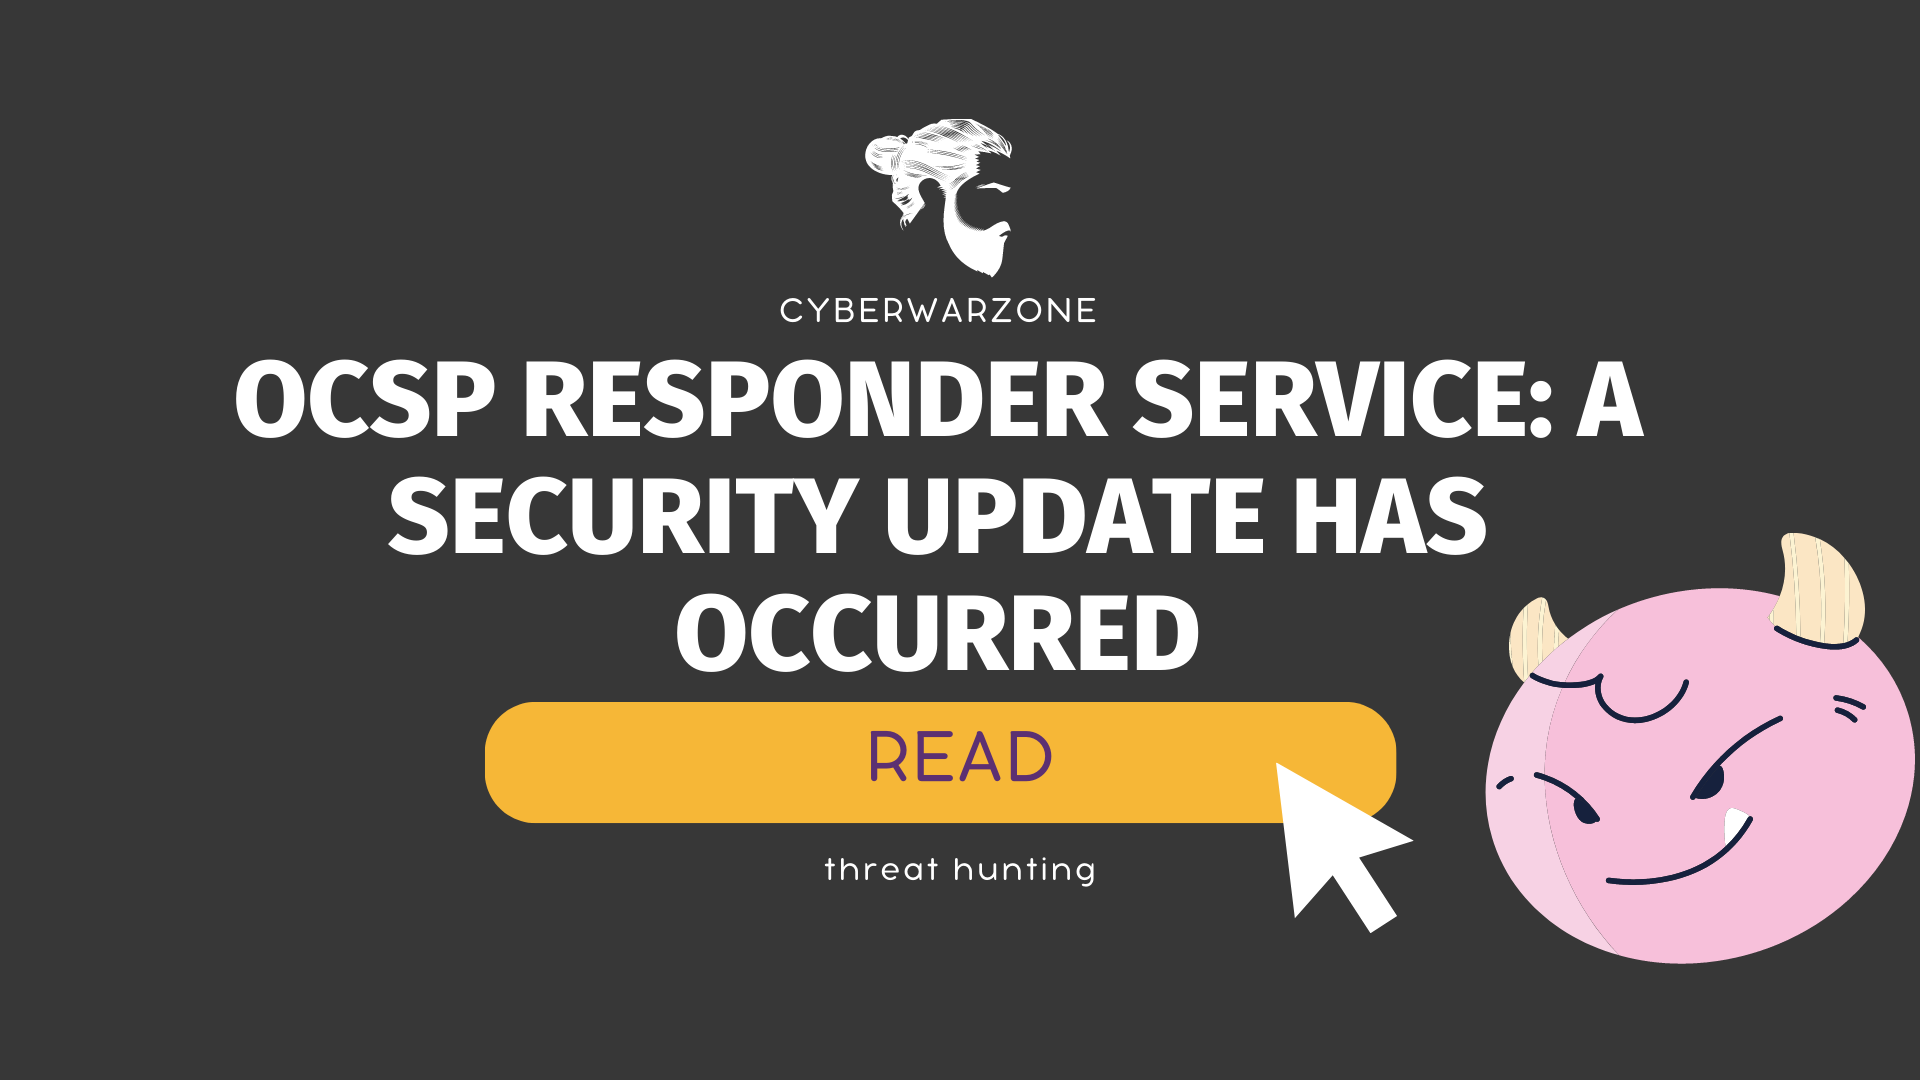 OCSP Responder Service: A Security Update Has Occurred